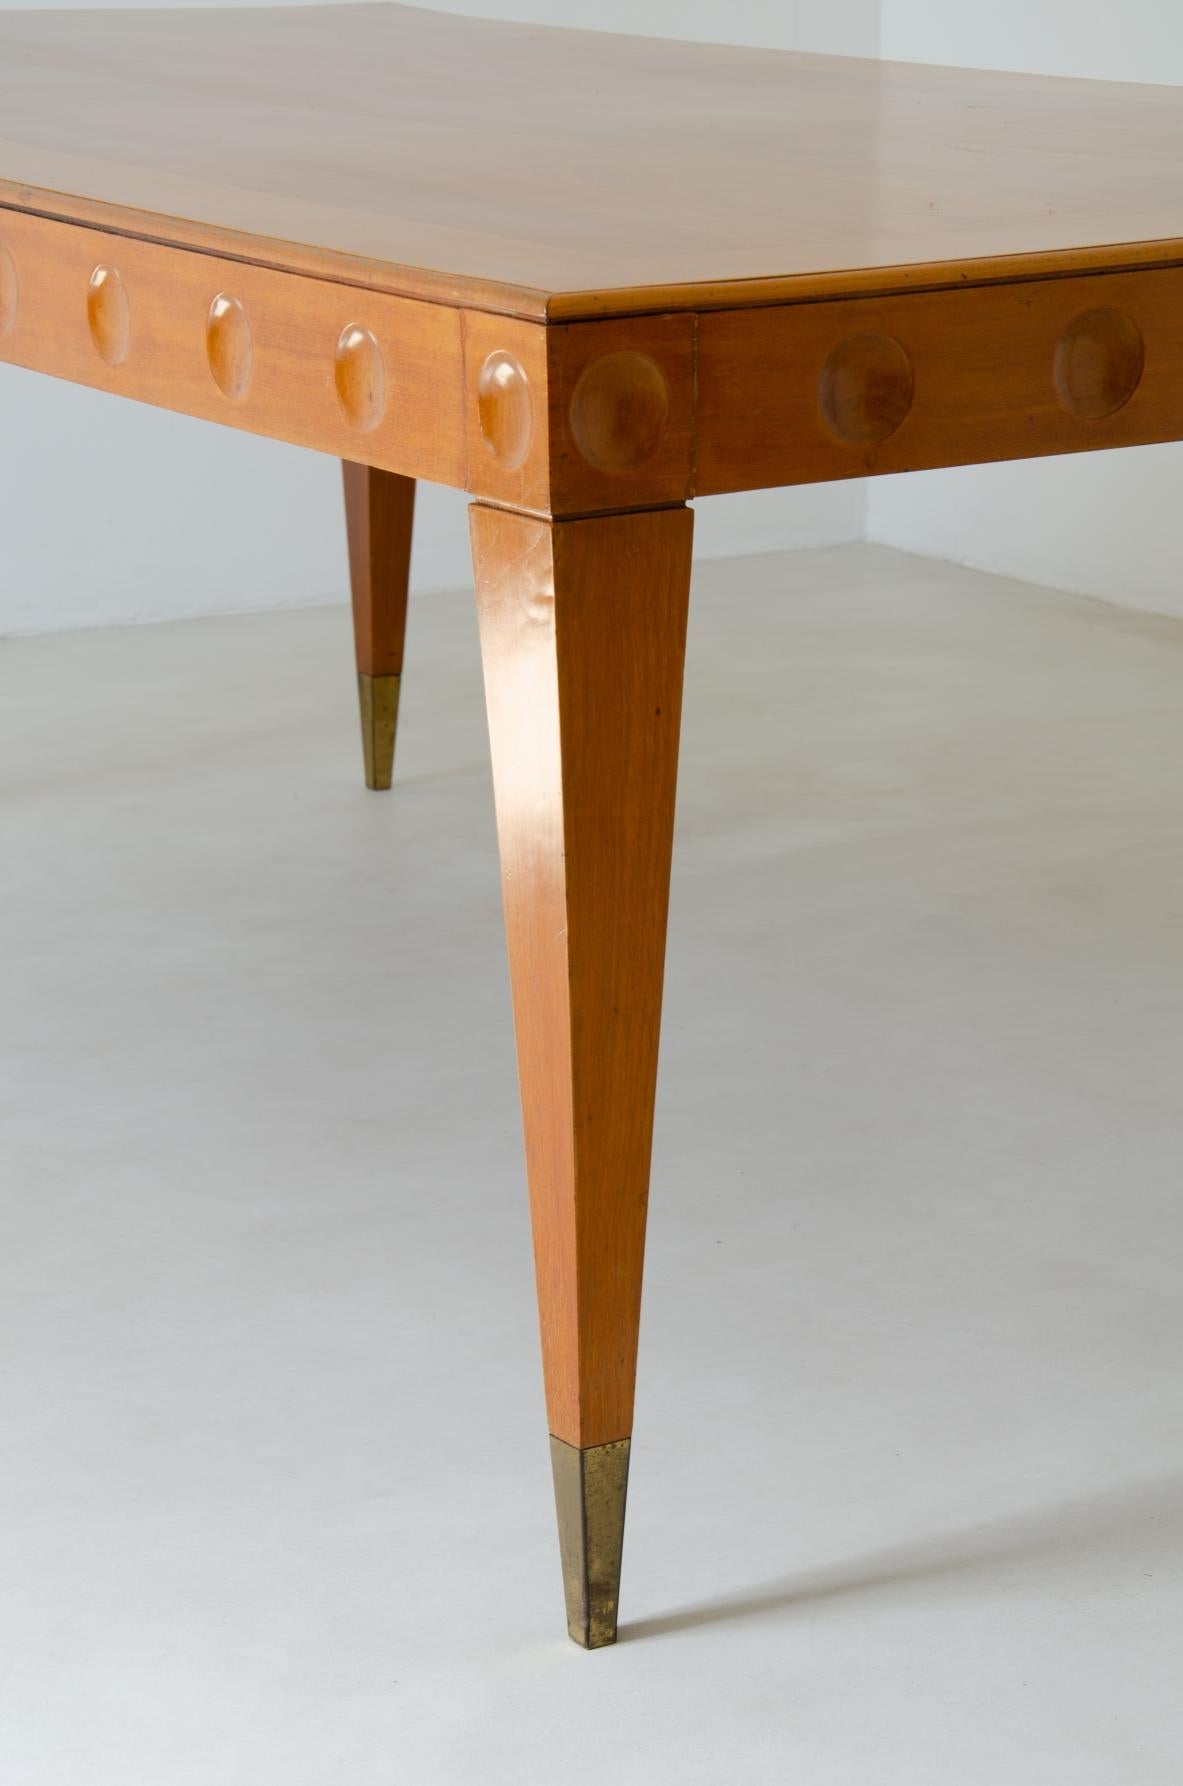 20th Century Gio Ponti Dining Table in Cherry Wood with Decorative Motif For Sale